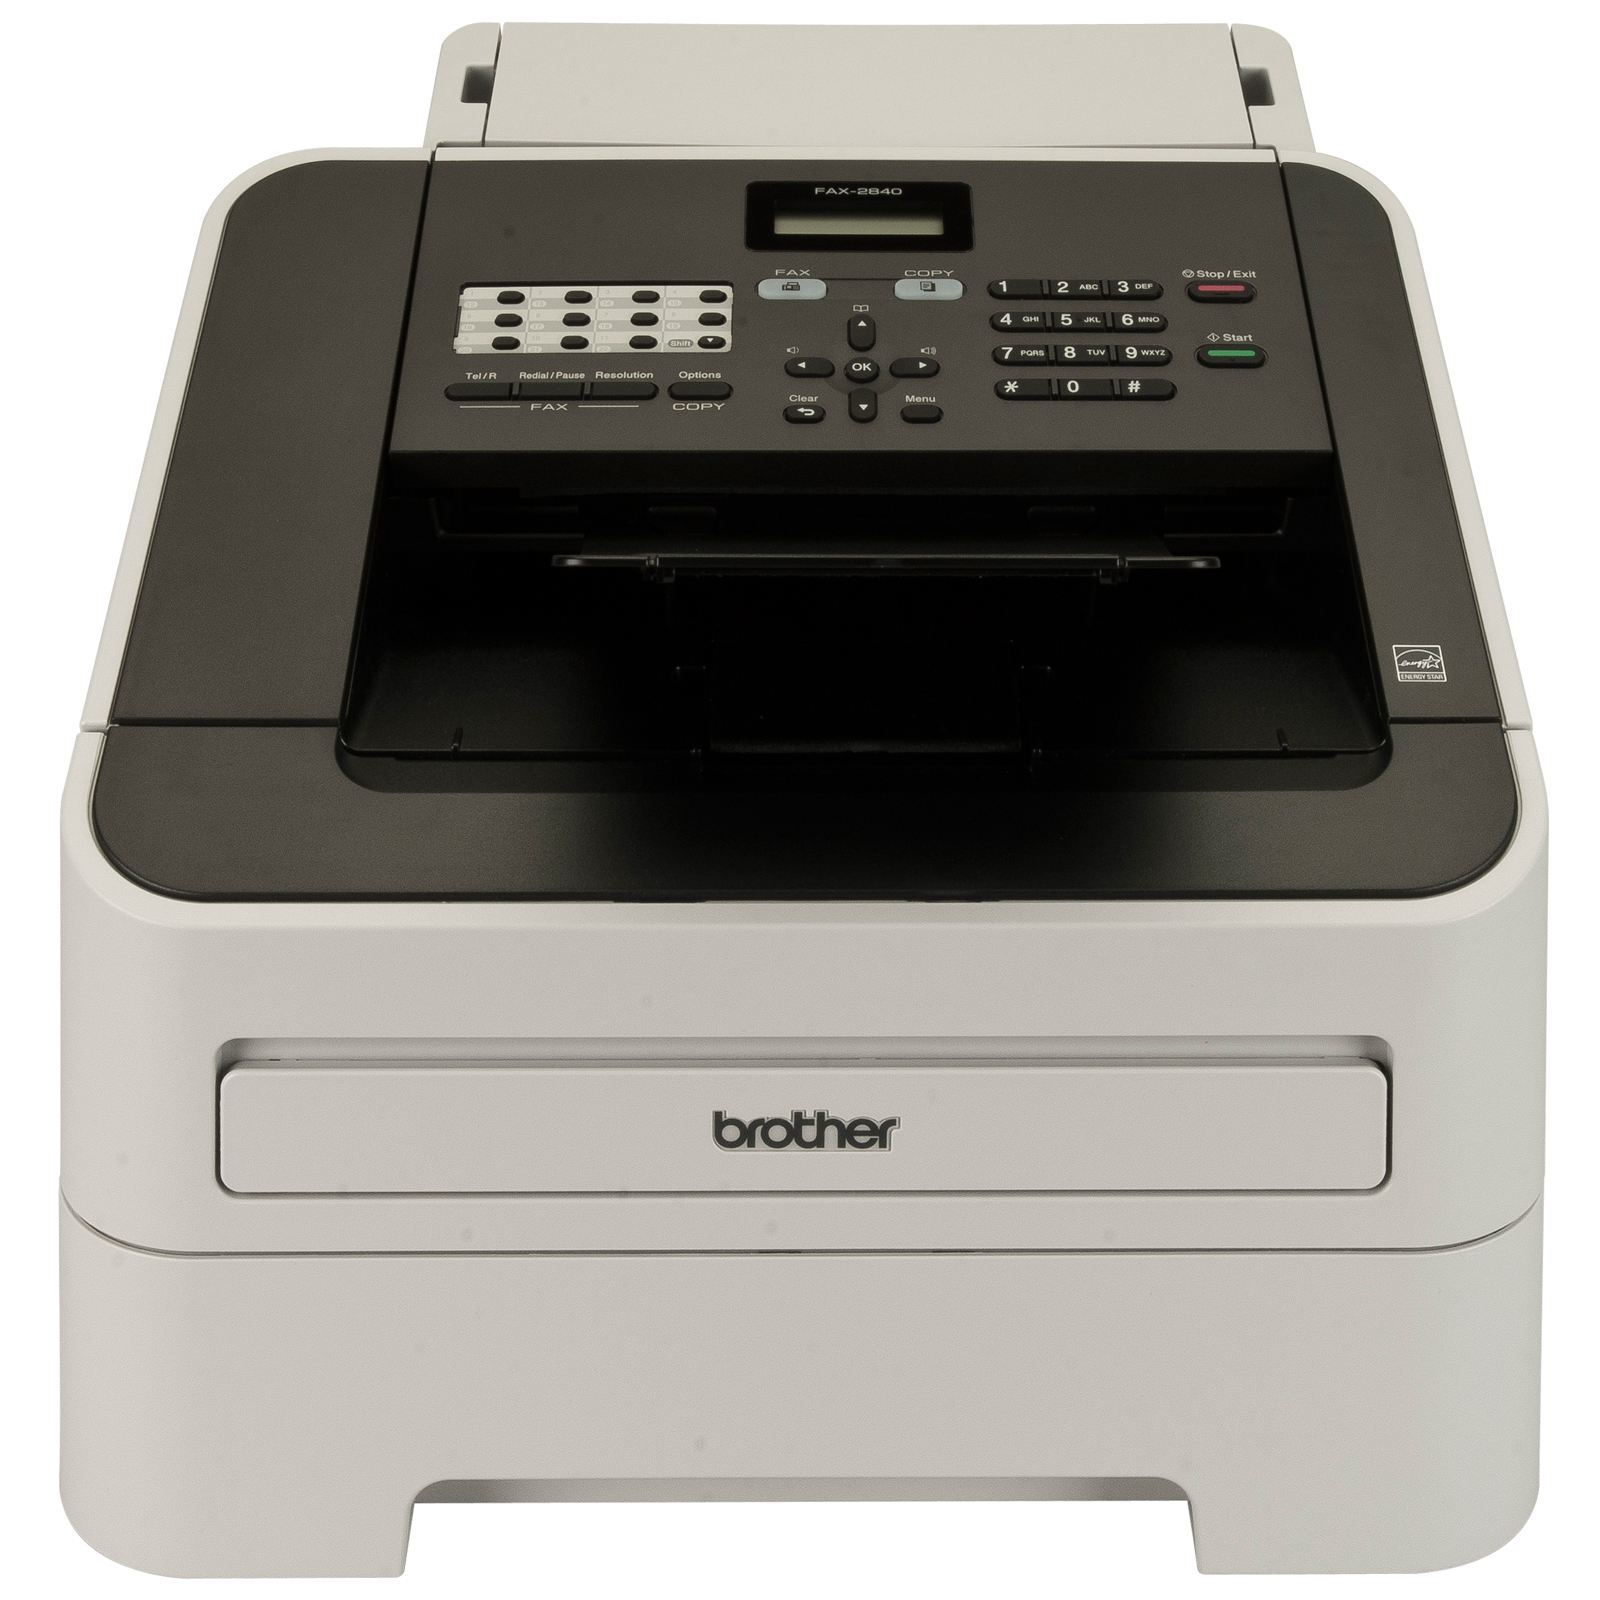 Fax 2840 Fax Copy Laser 20cpm Brother Scanners Fax2840f1 4977766712781